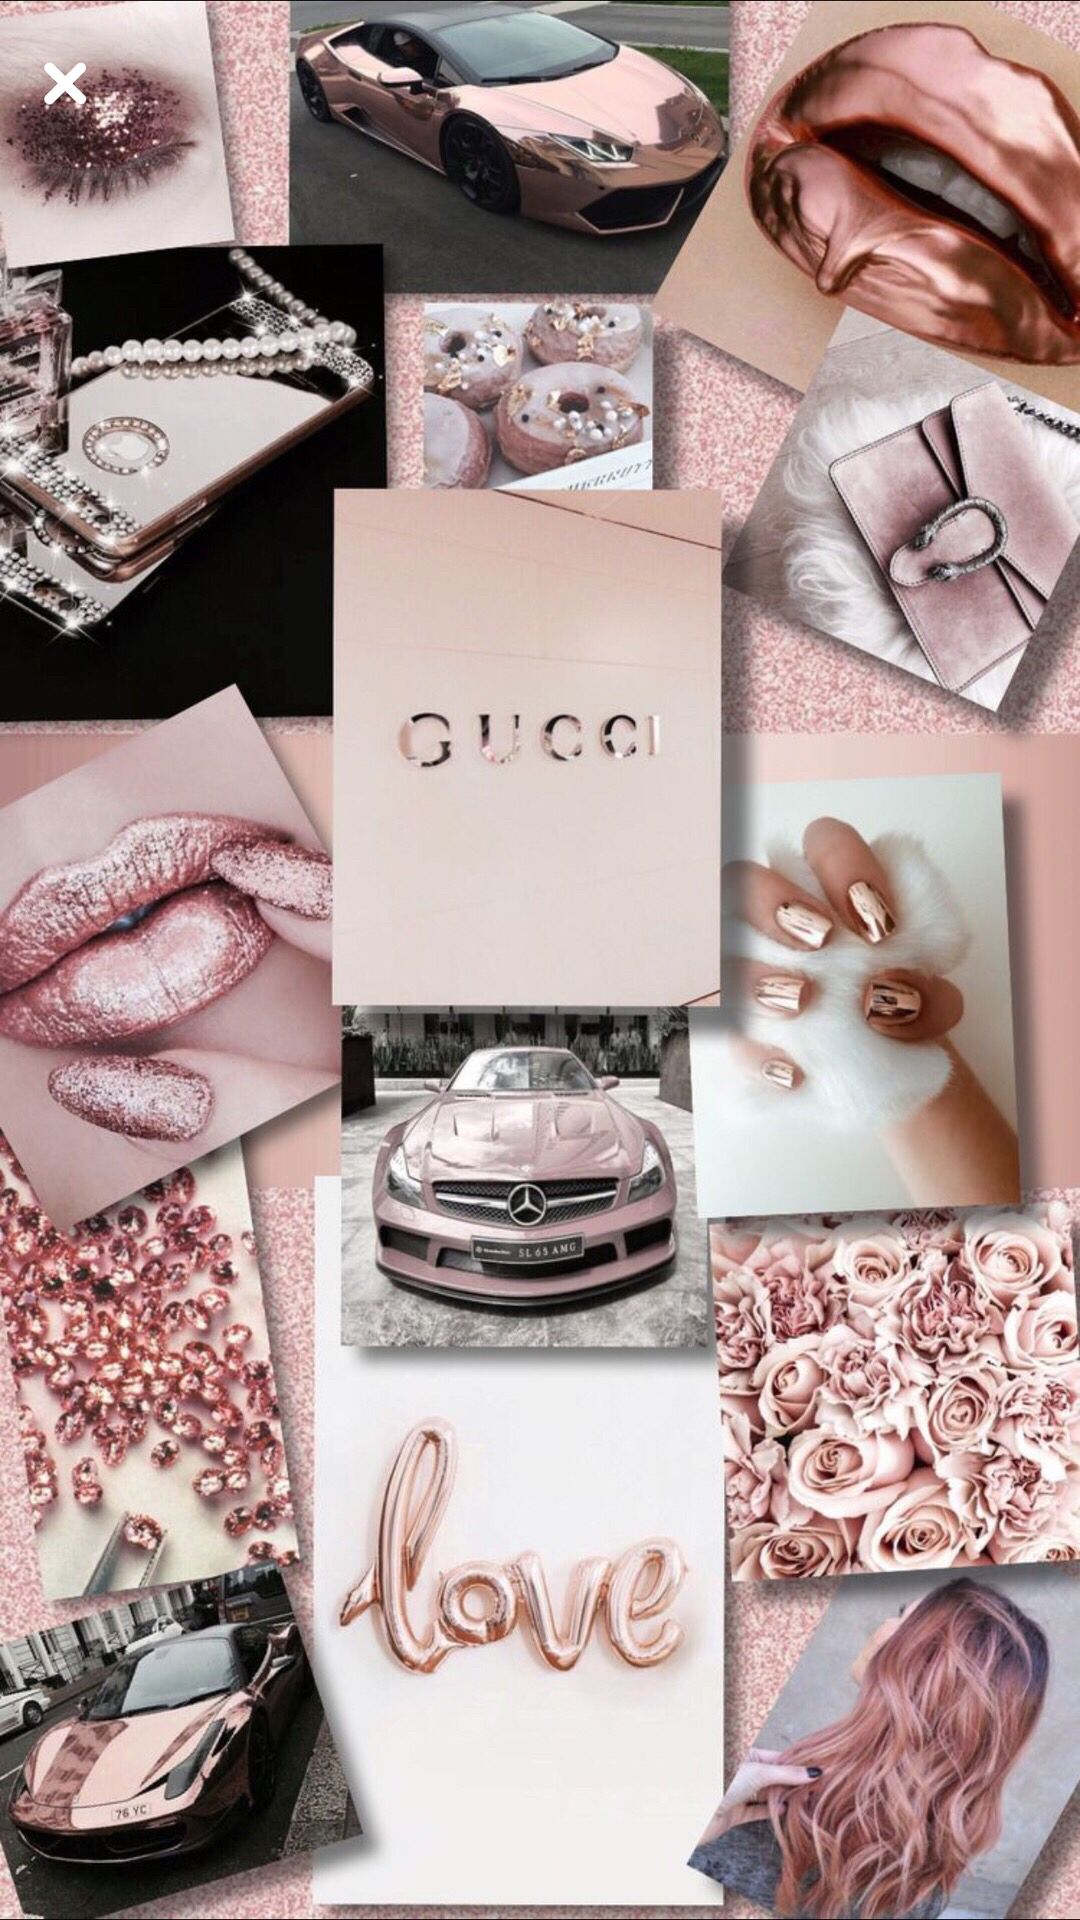 Stylish 999 Gucci background pink Free download high quality images